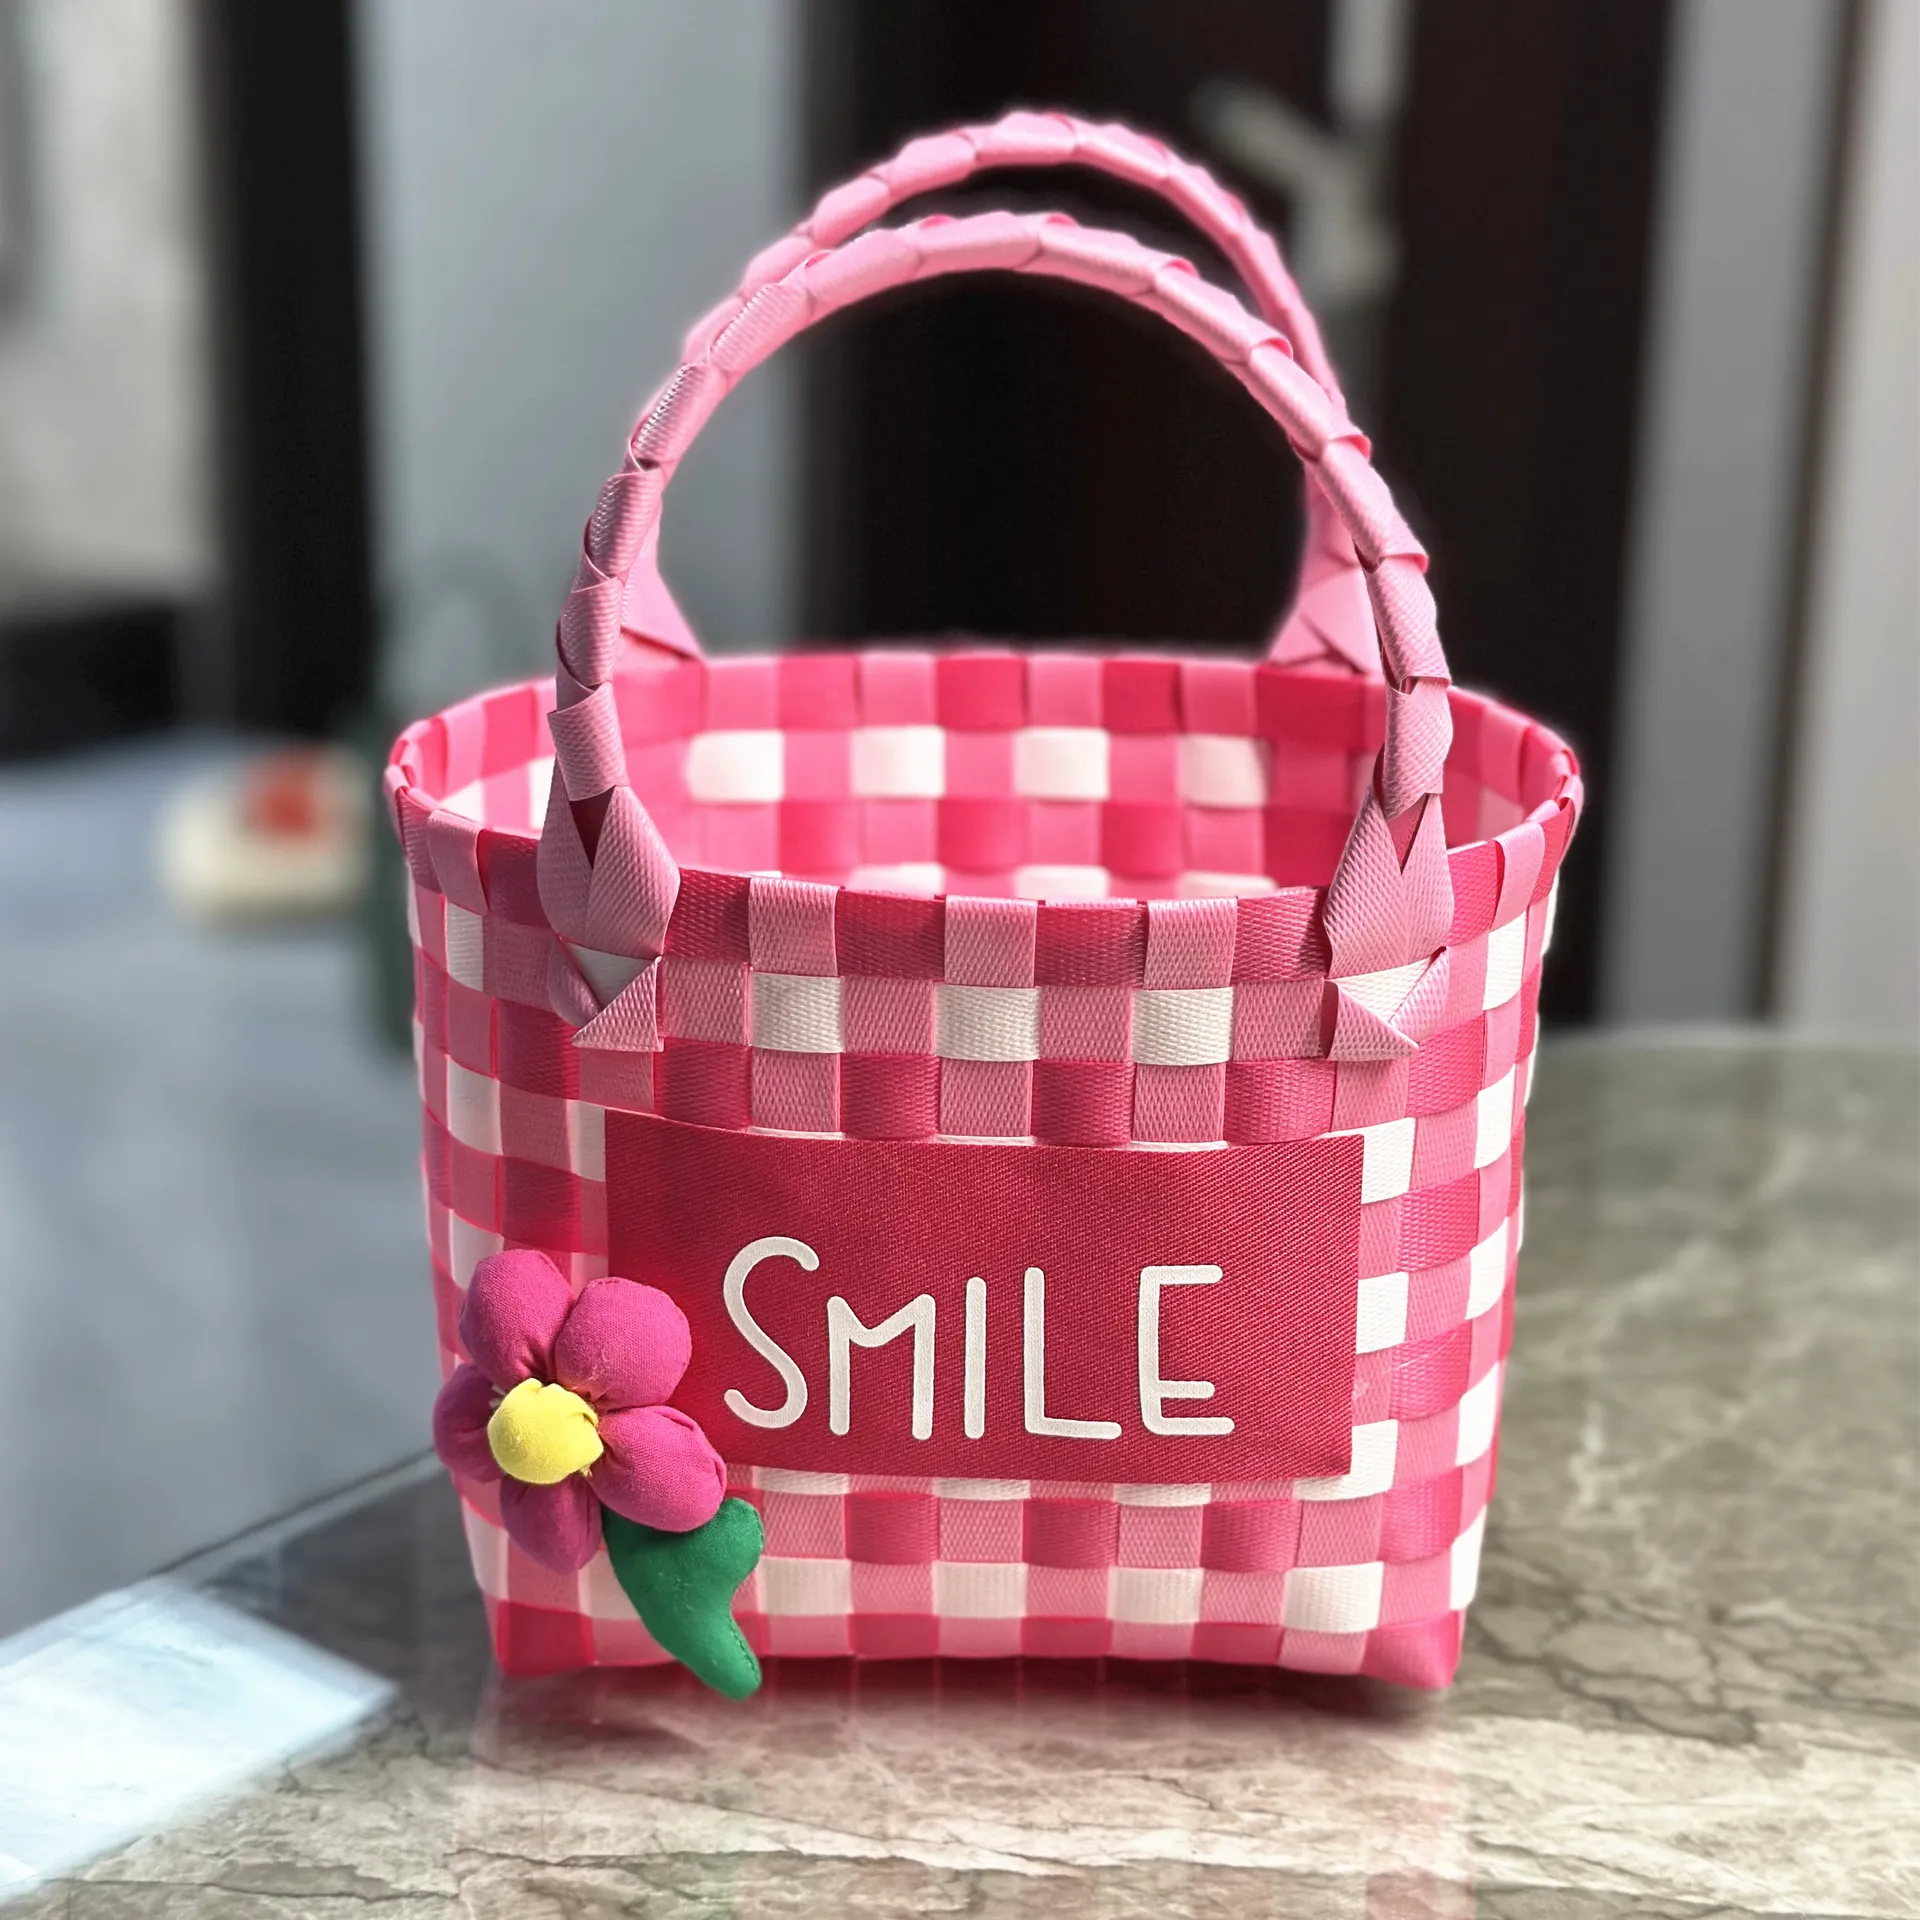 PVC Material Totes Casual and Multi-style Braided Bags with Plaid Elements and Floral Decorations